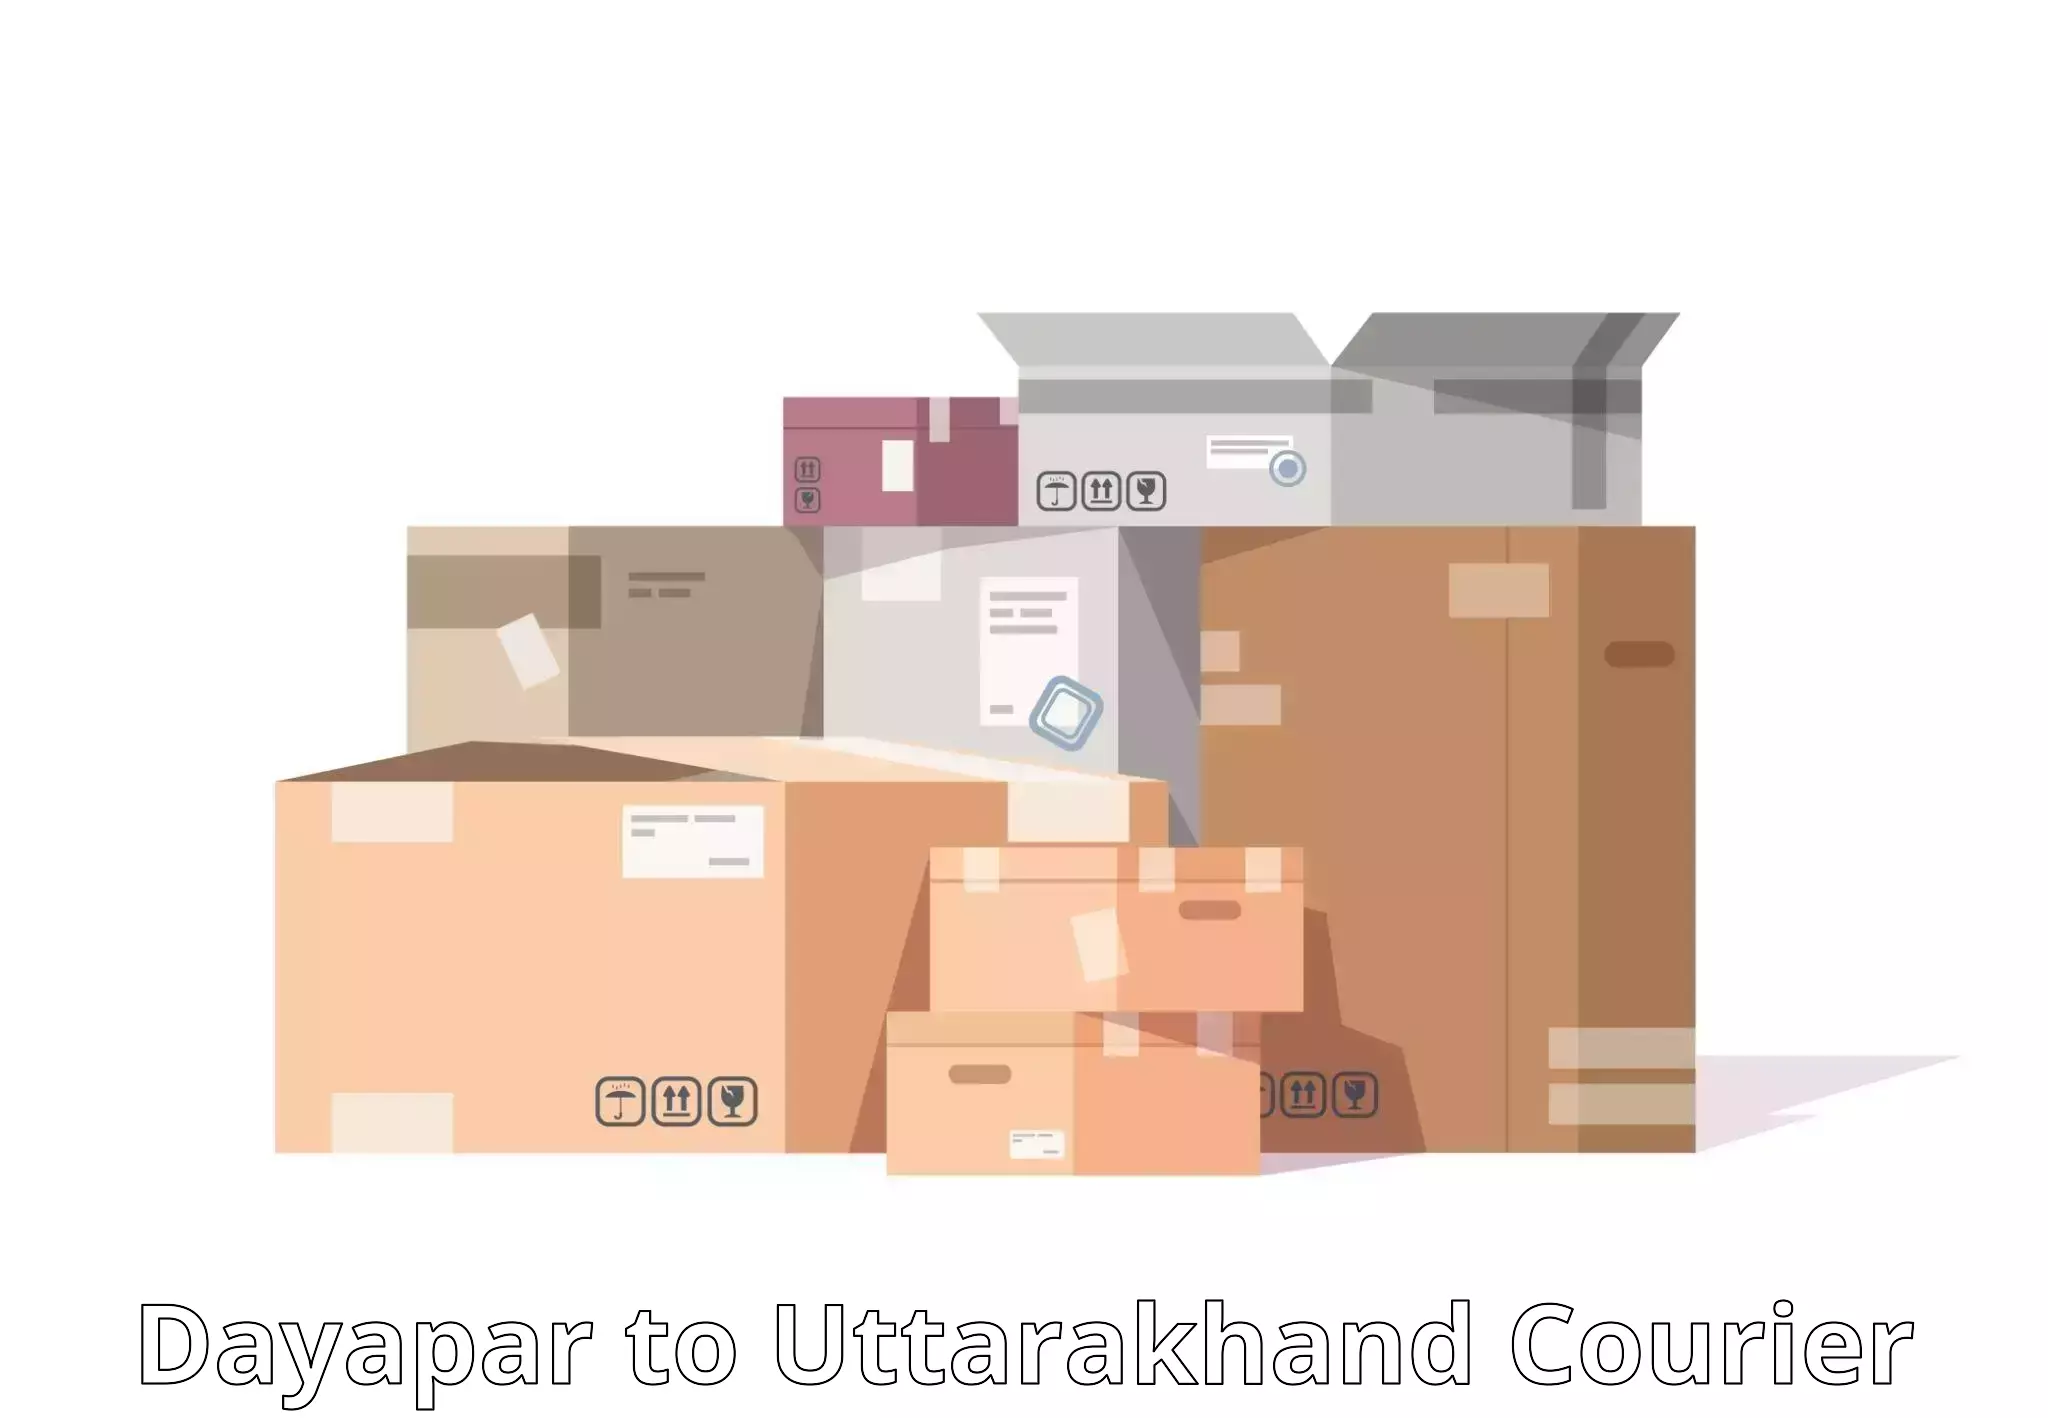 Large-scale shipping solutions in Dayapar to IIT Roorkee